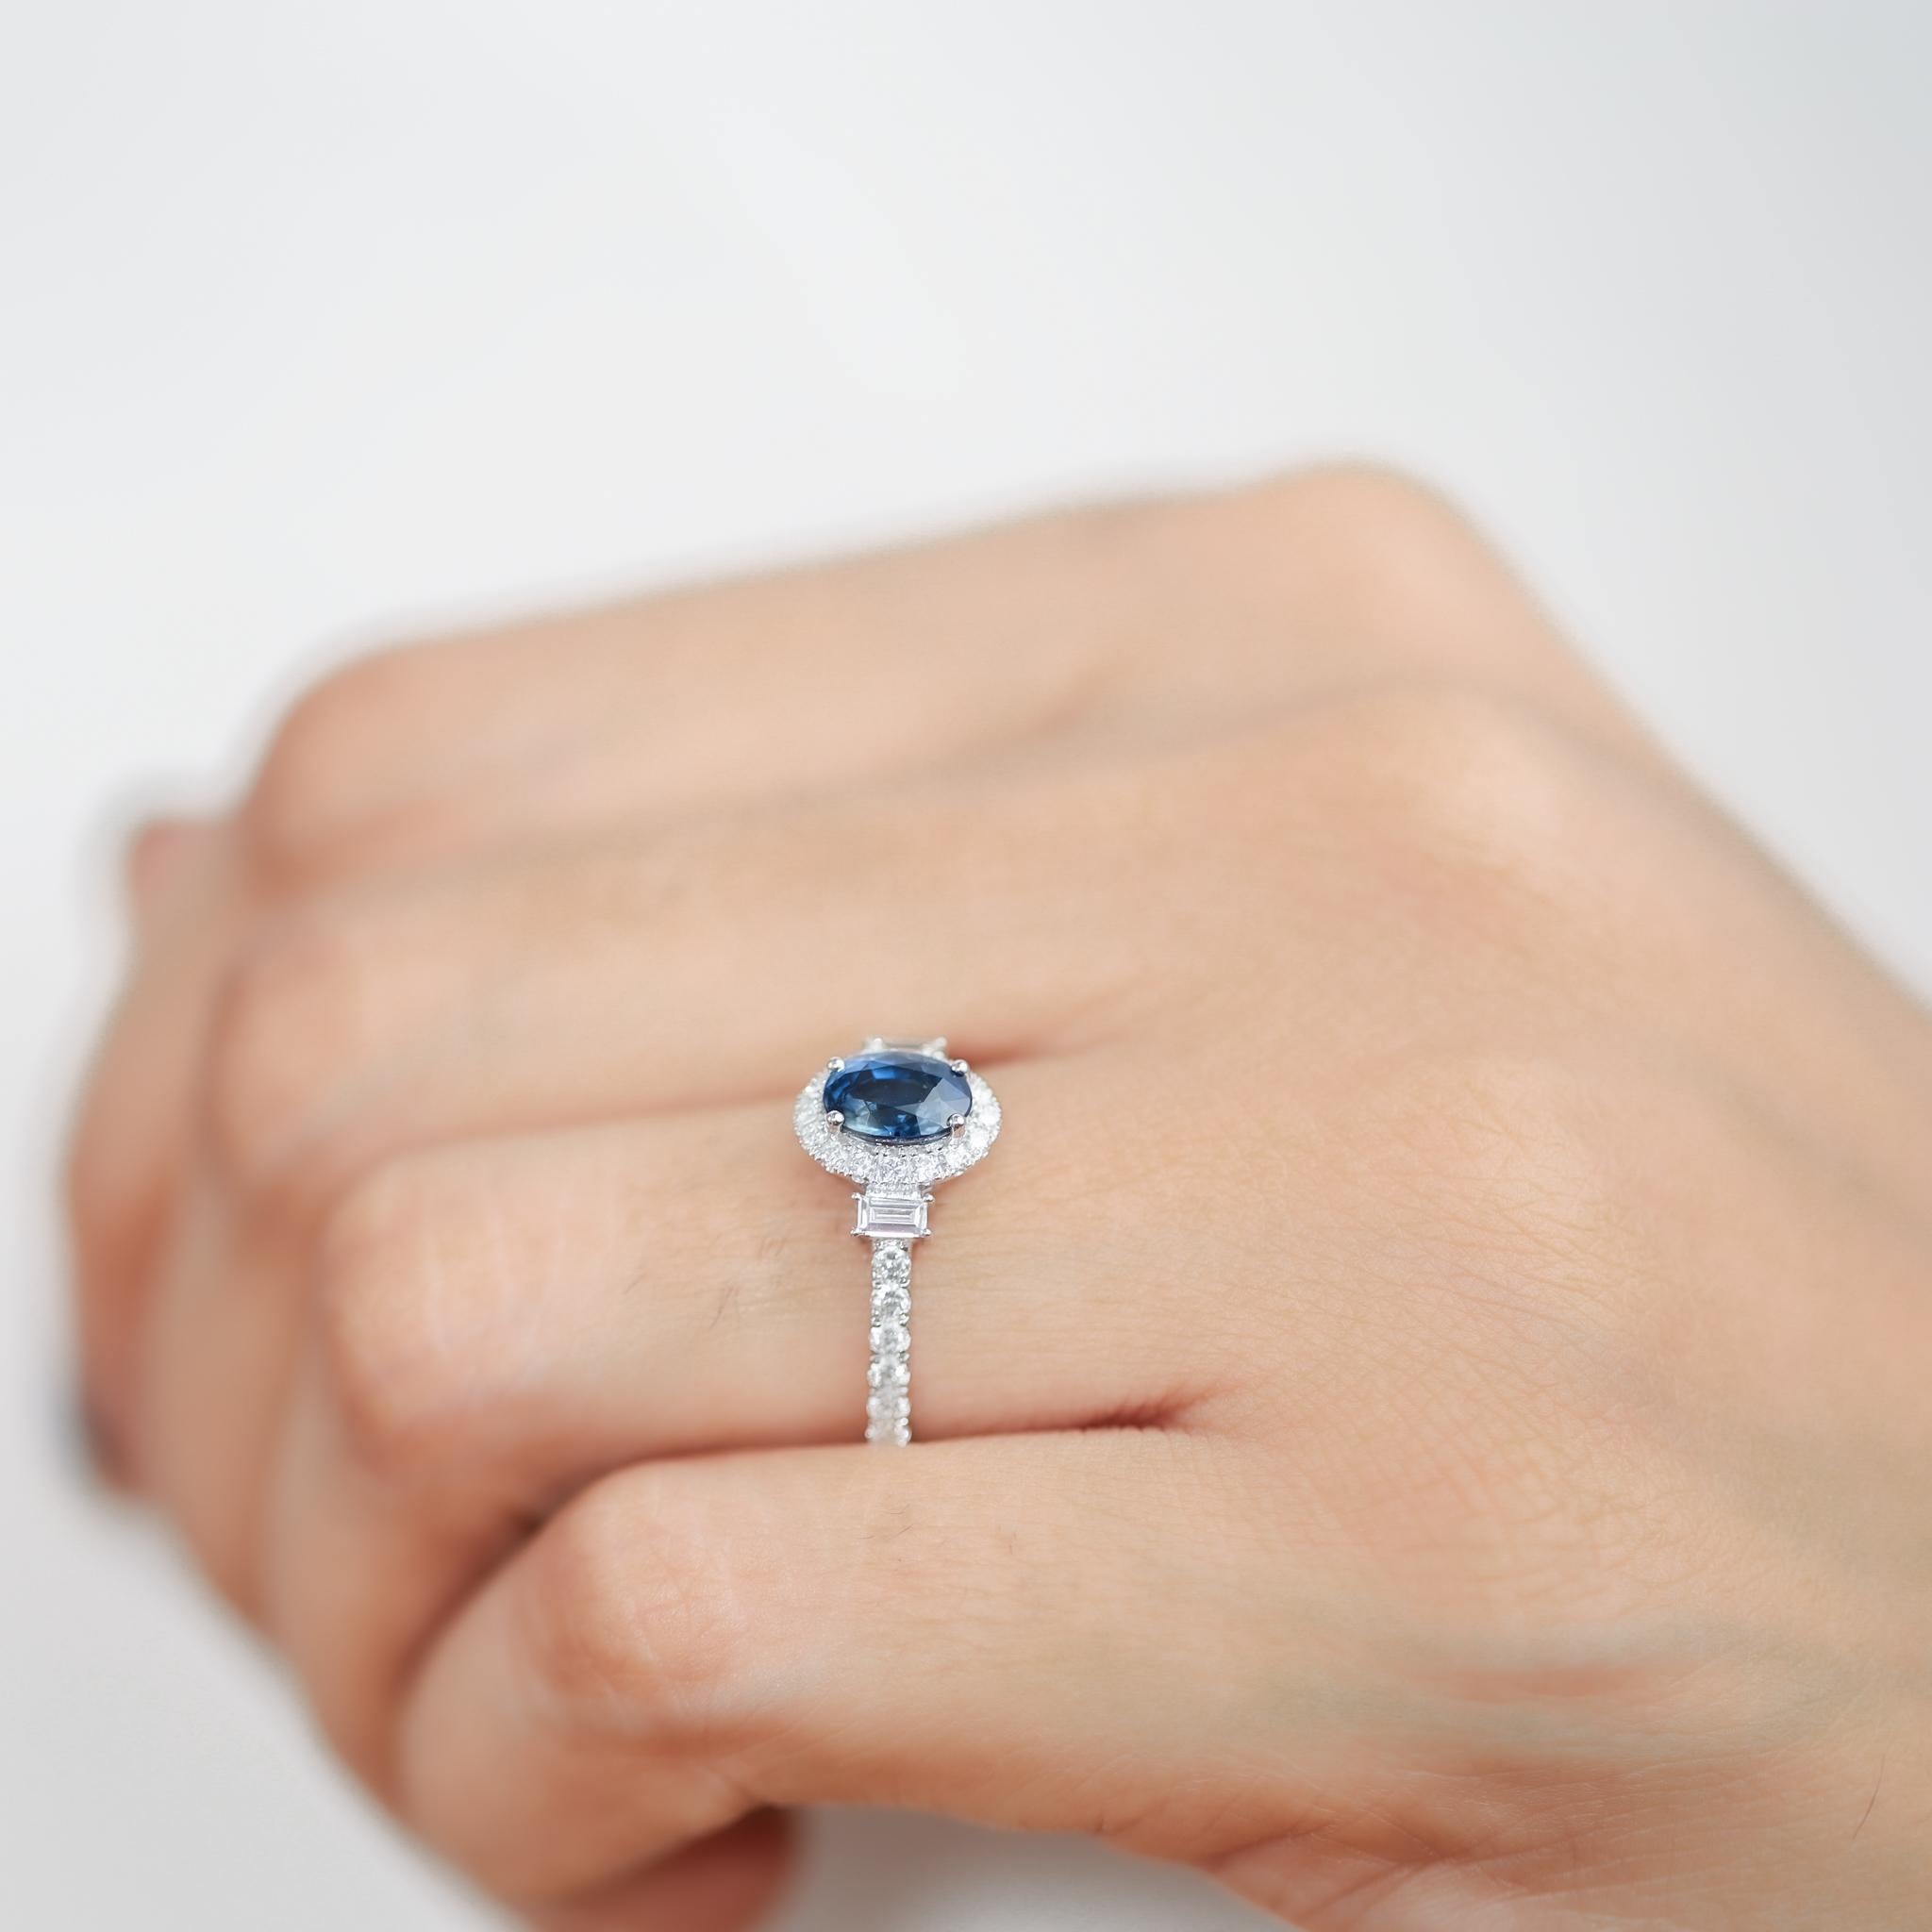 Oval Blue Sapphire Diamond Baguette Round Cut Double Halo Cocktail Ring

Available in 18k white gold.

Same design can be made also with other custom gemstones per request.

Product details:

- Solid gold

- Diamond - approx. 0.54 carat

- Sapphire